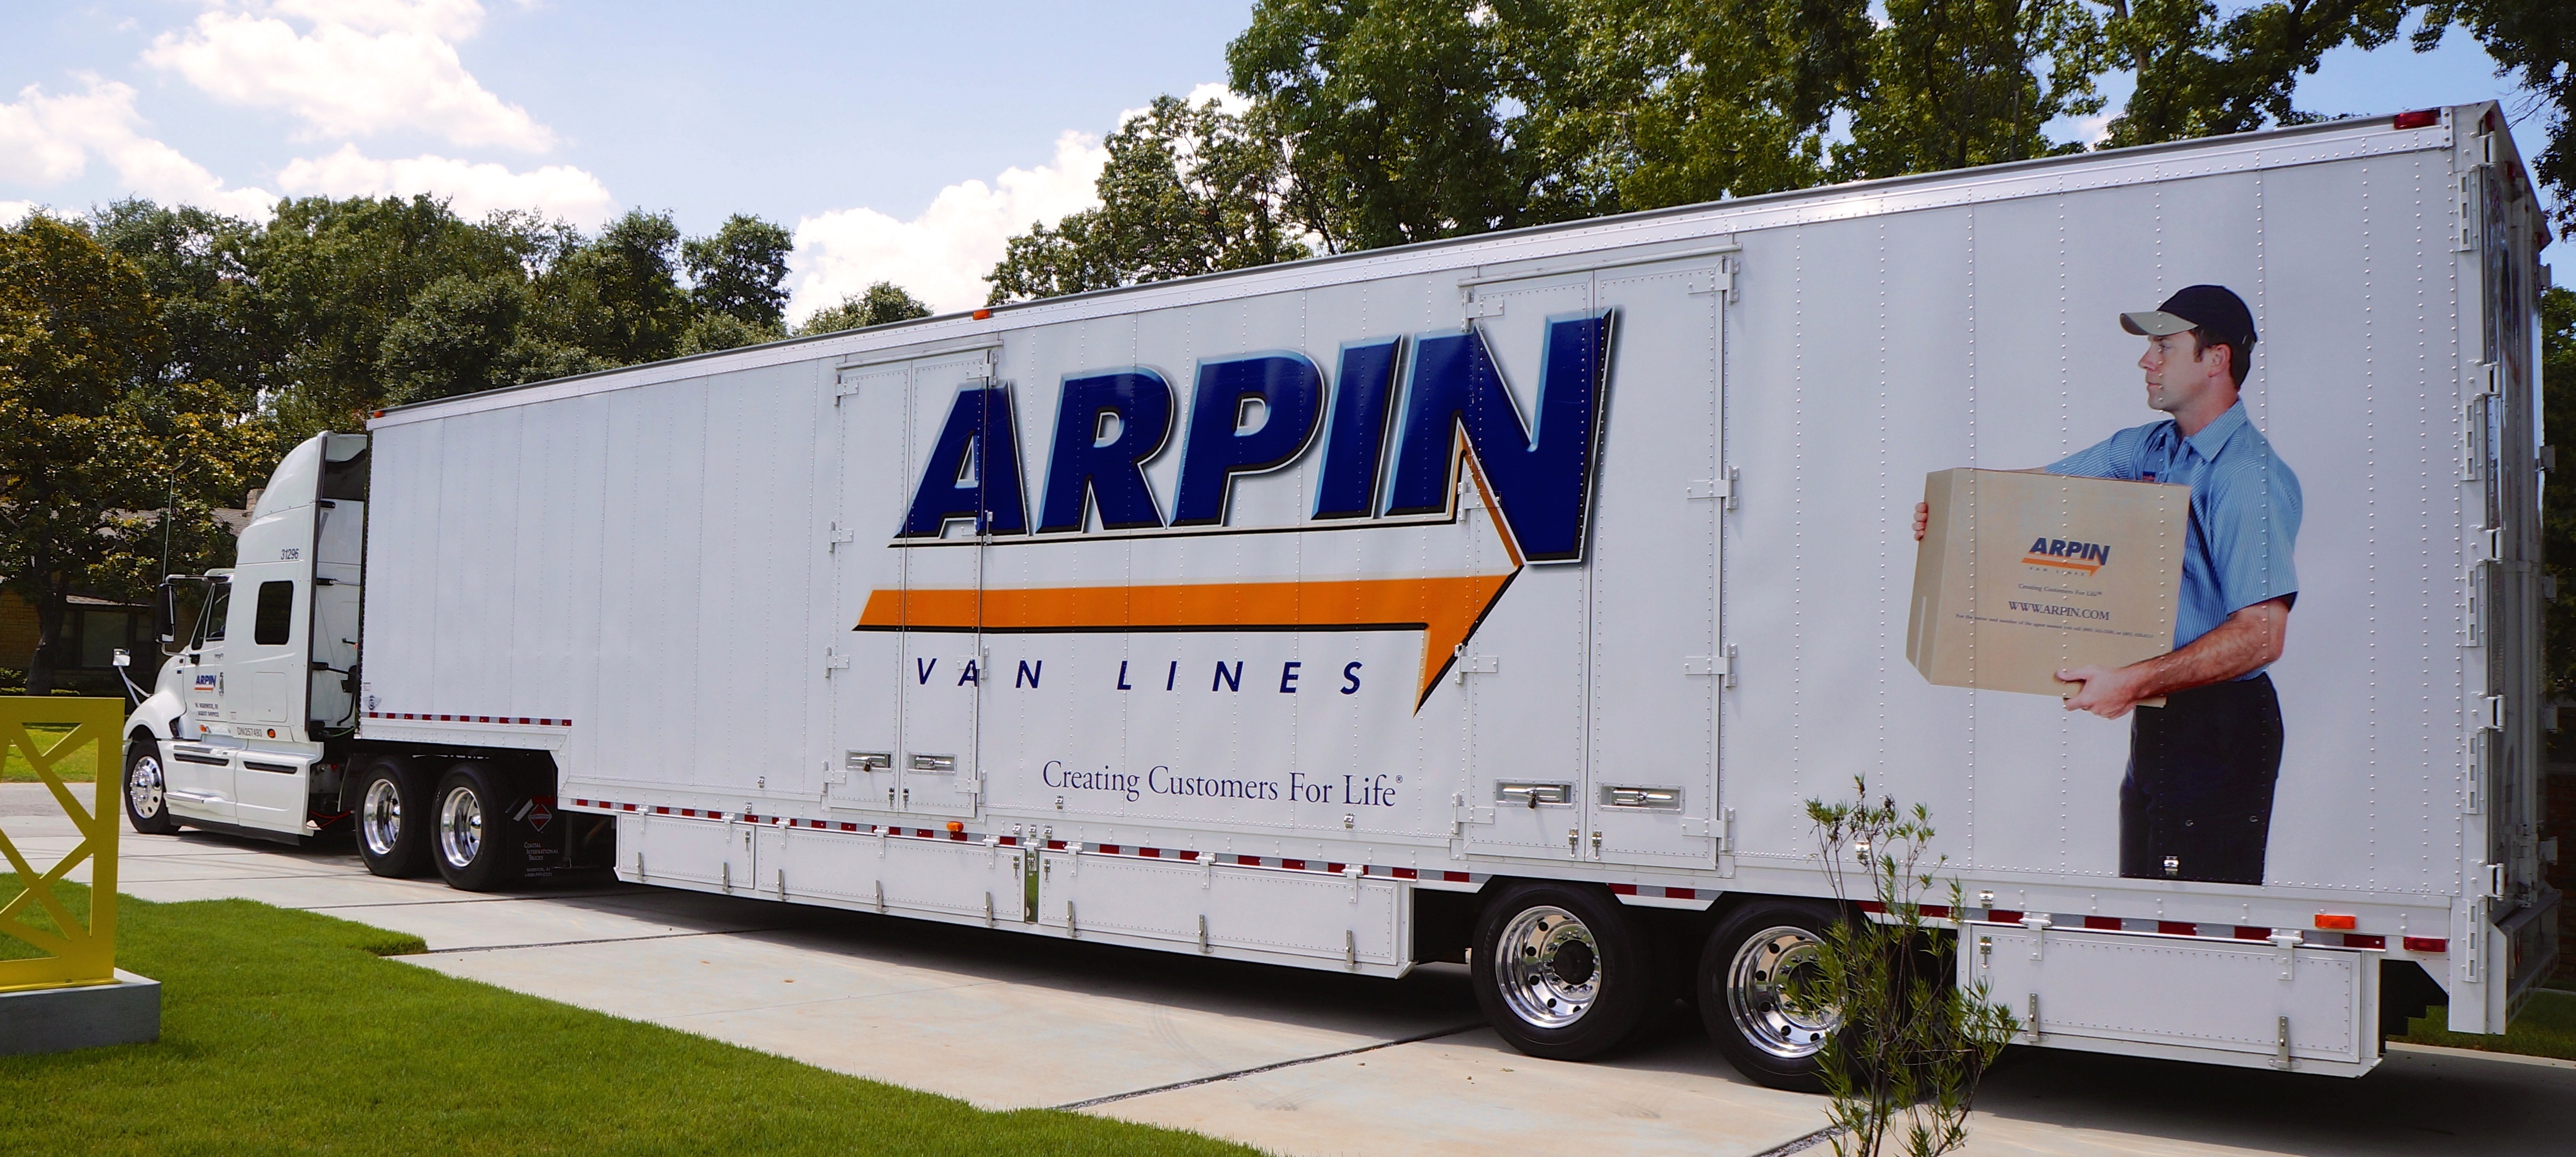 Arpin truck parked by trees